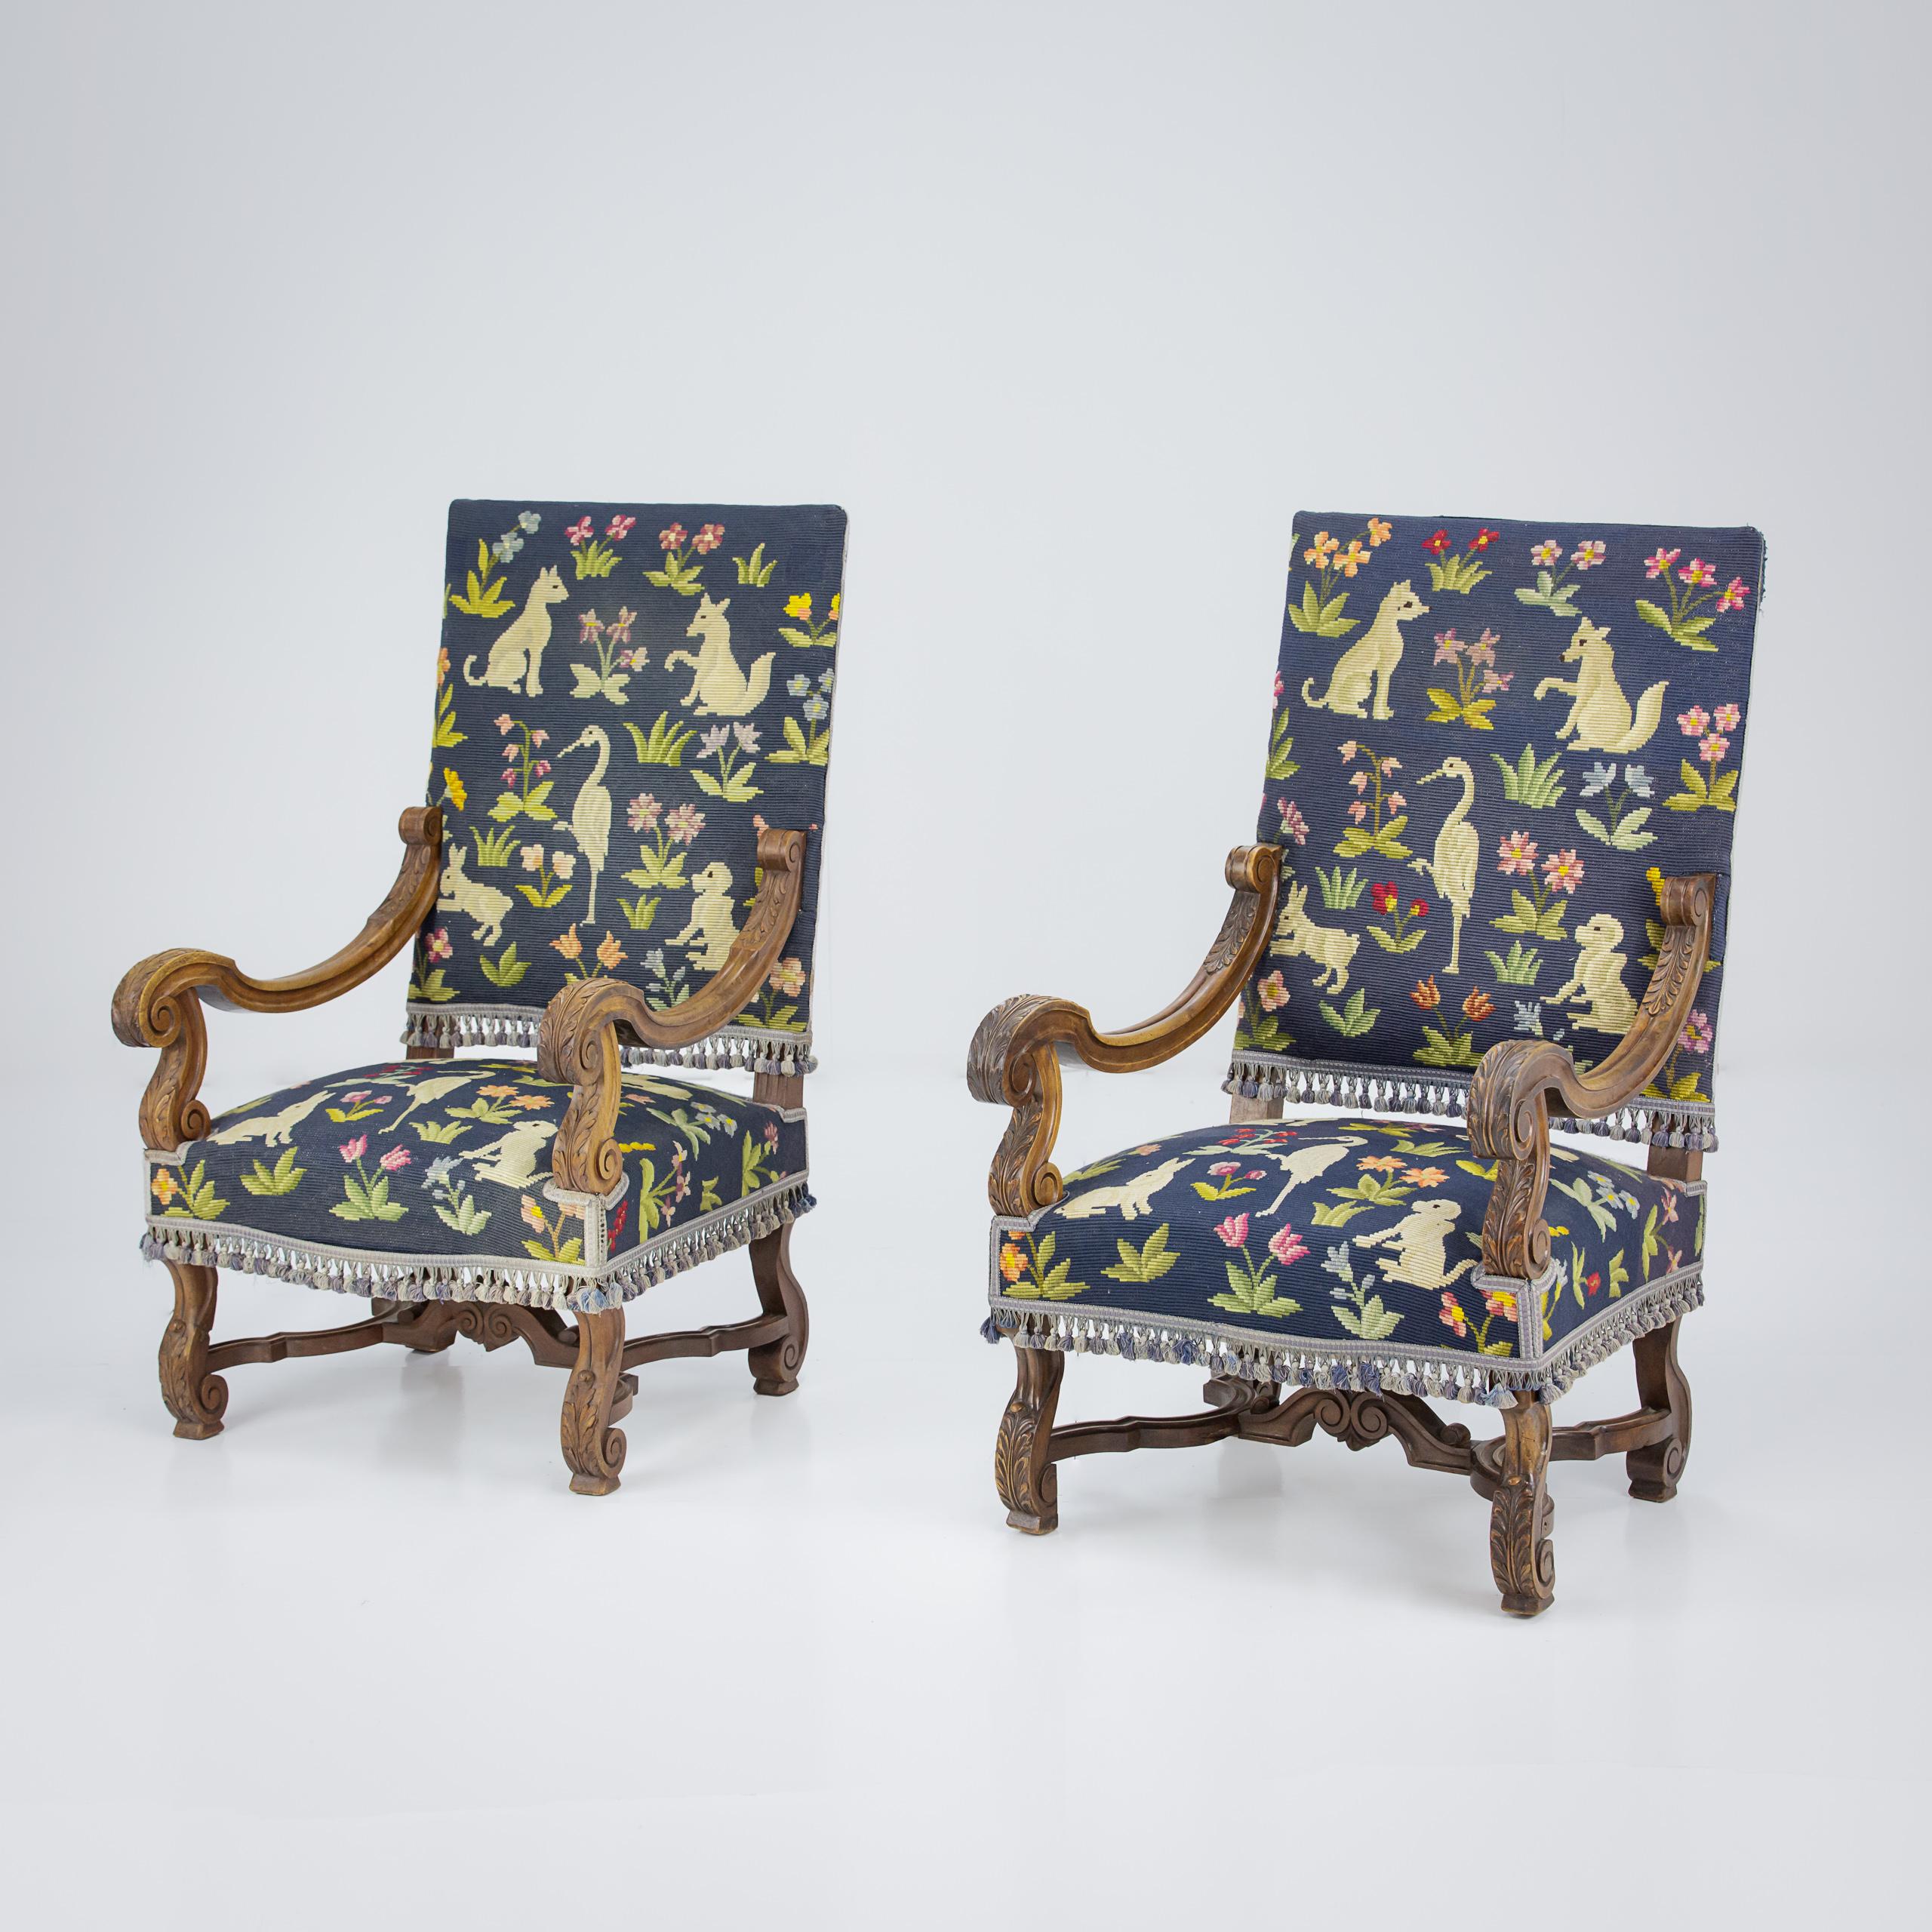 Pair of Large Scale late 19th Century open Armchairs, with wonderful original primitive needlepoint upholstery. France Circa 1920. Seat height 44cm. Needlepoint in good condition, trim has lost one or two tassels.